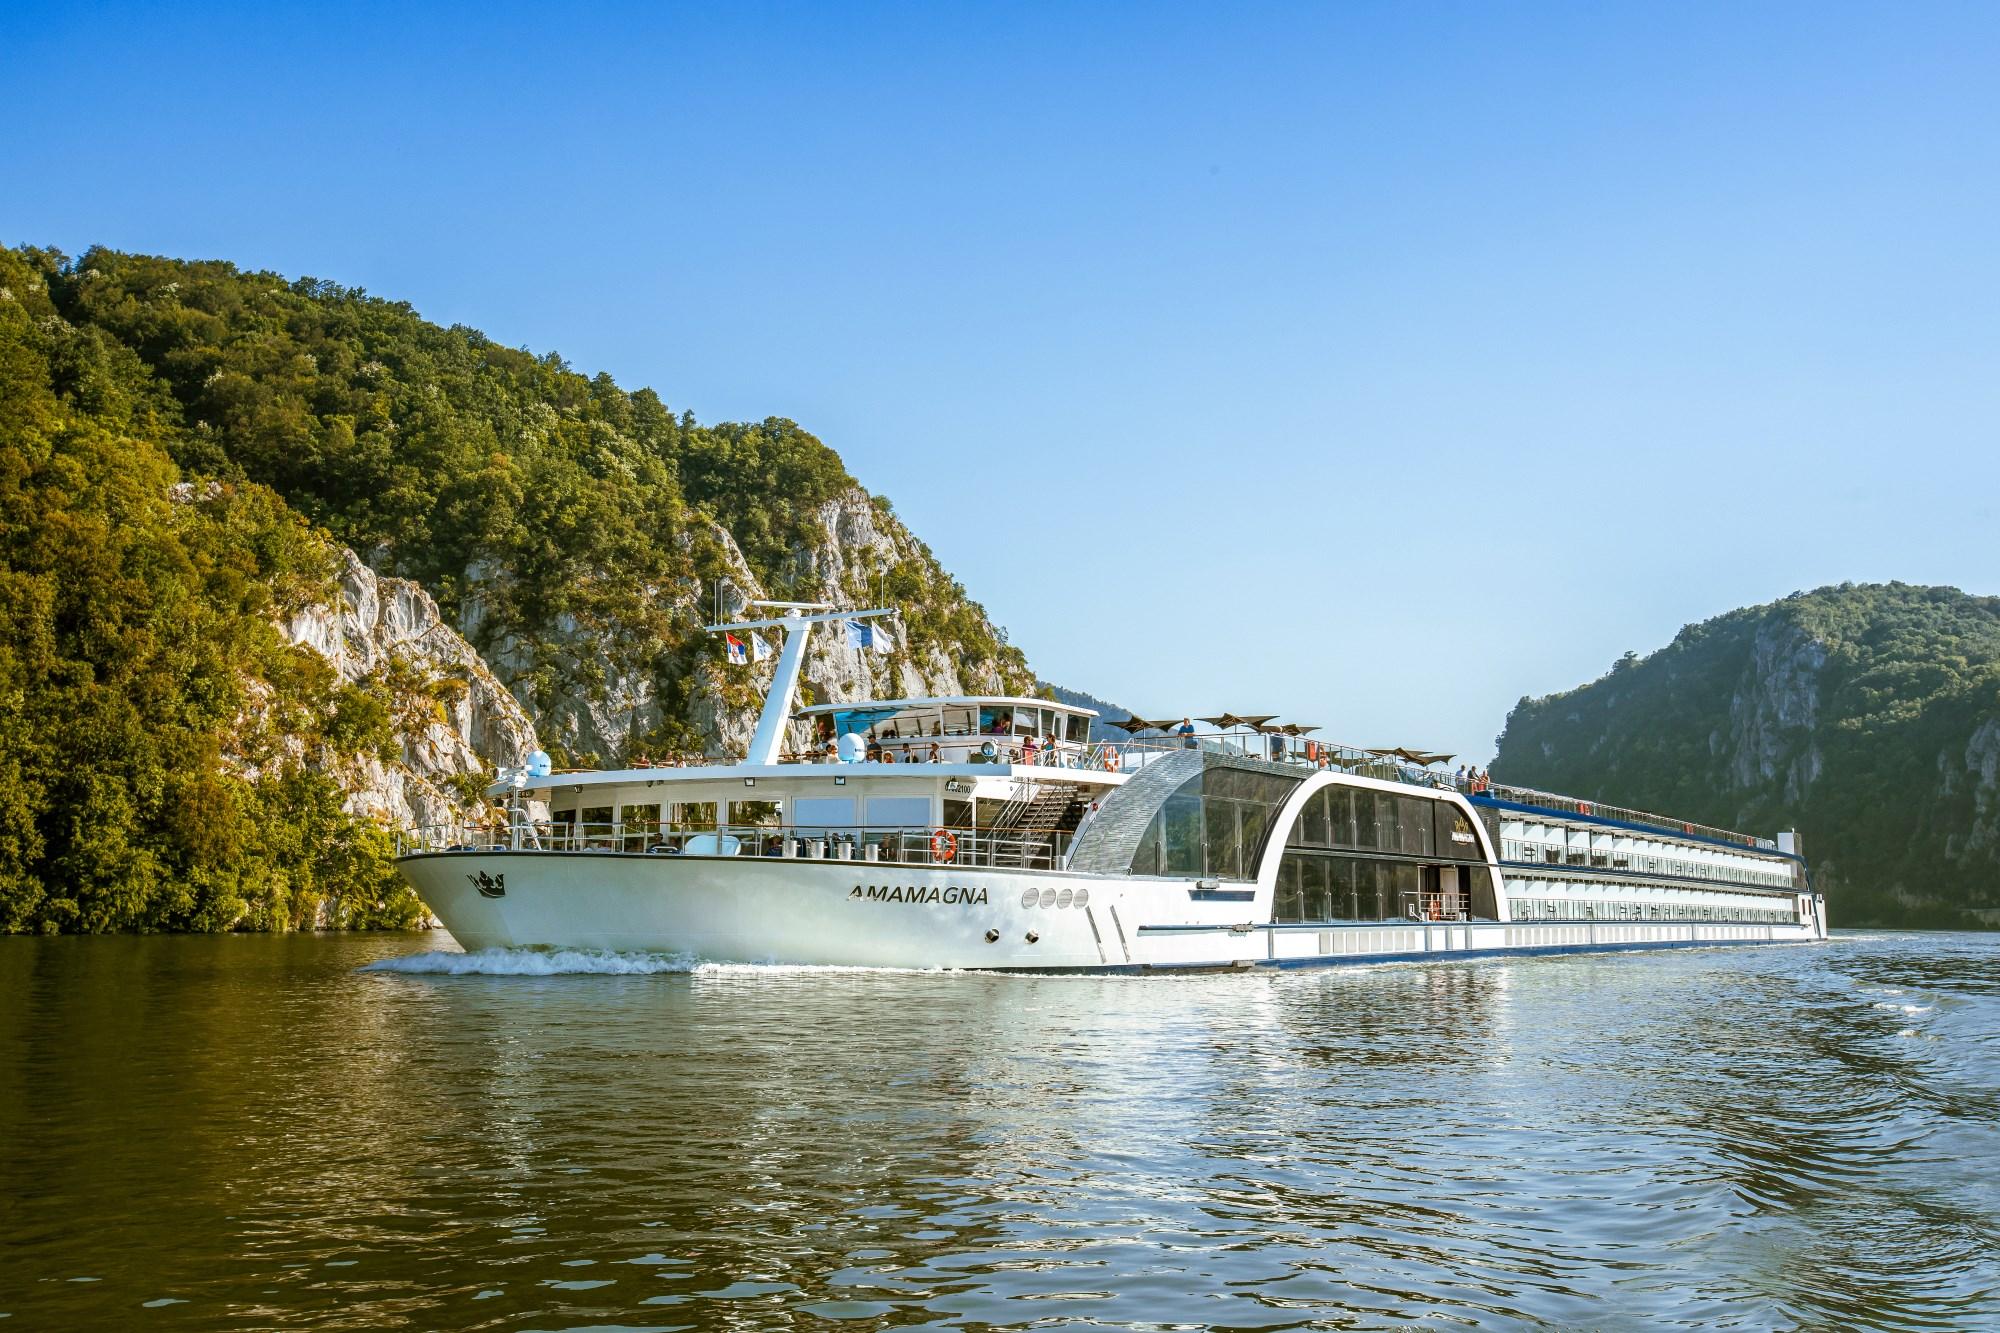 Save 20% with AmaWaterways